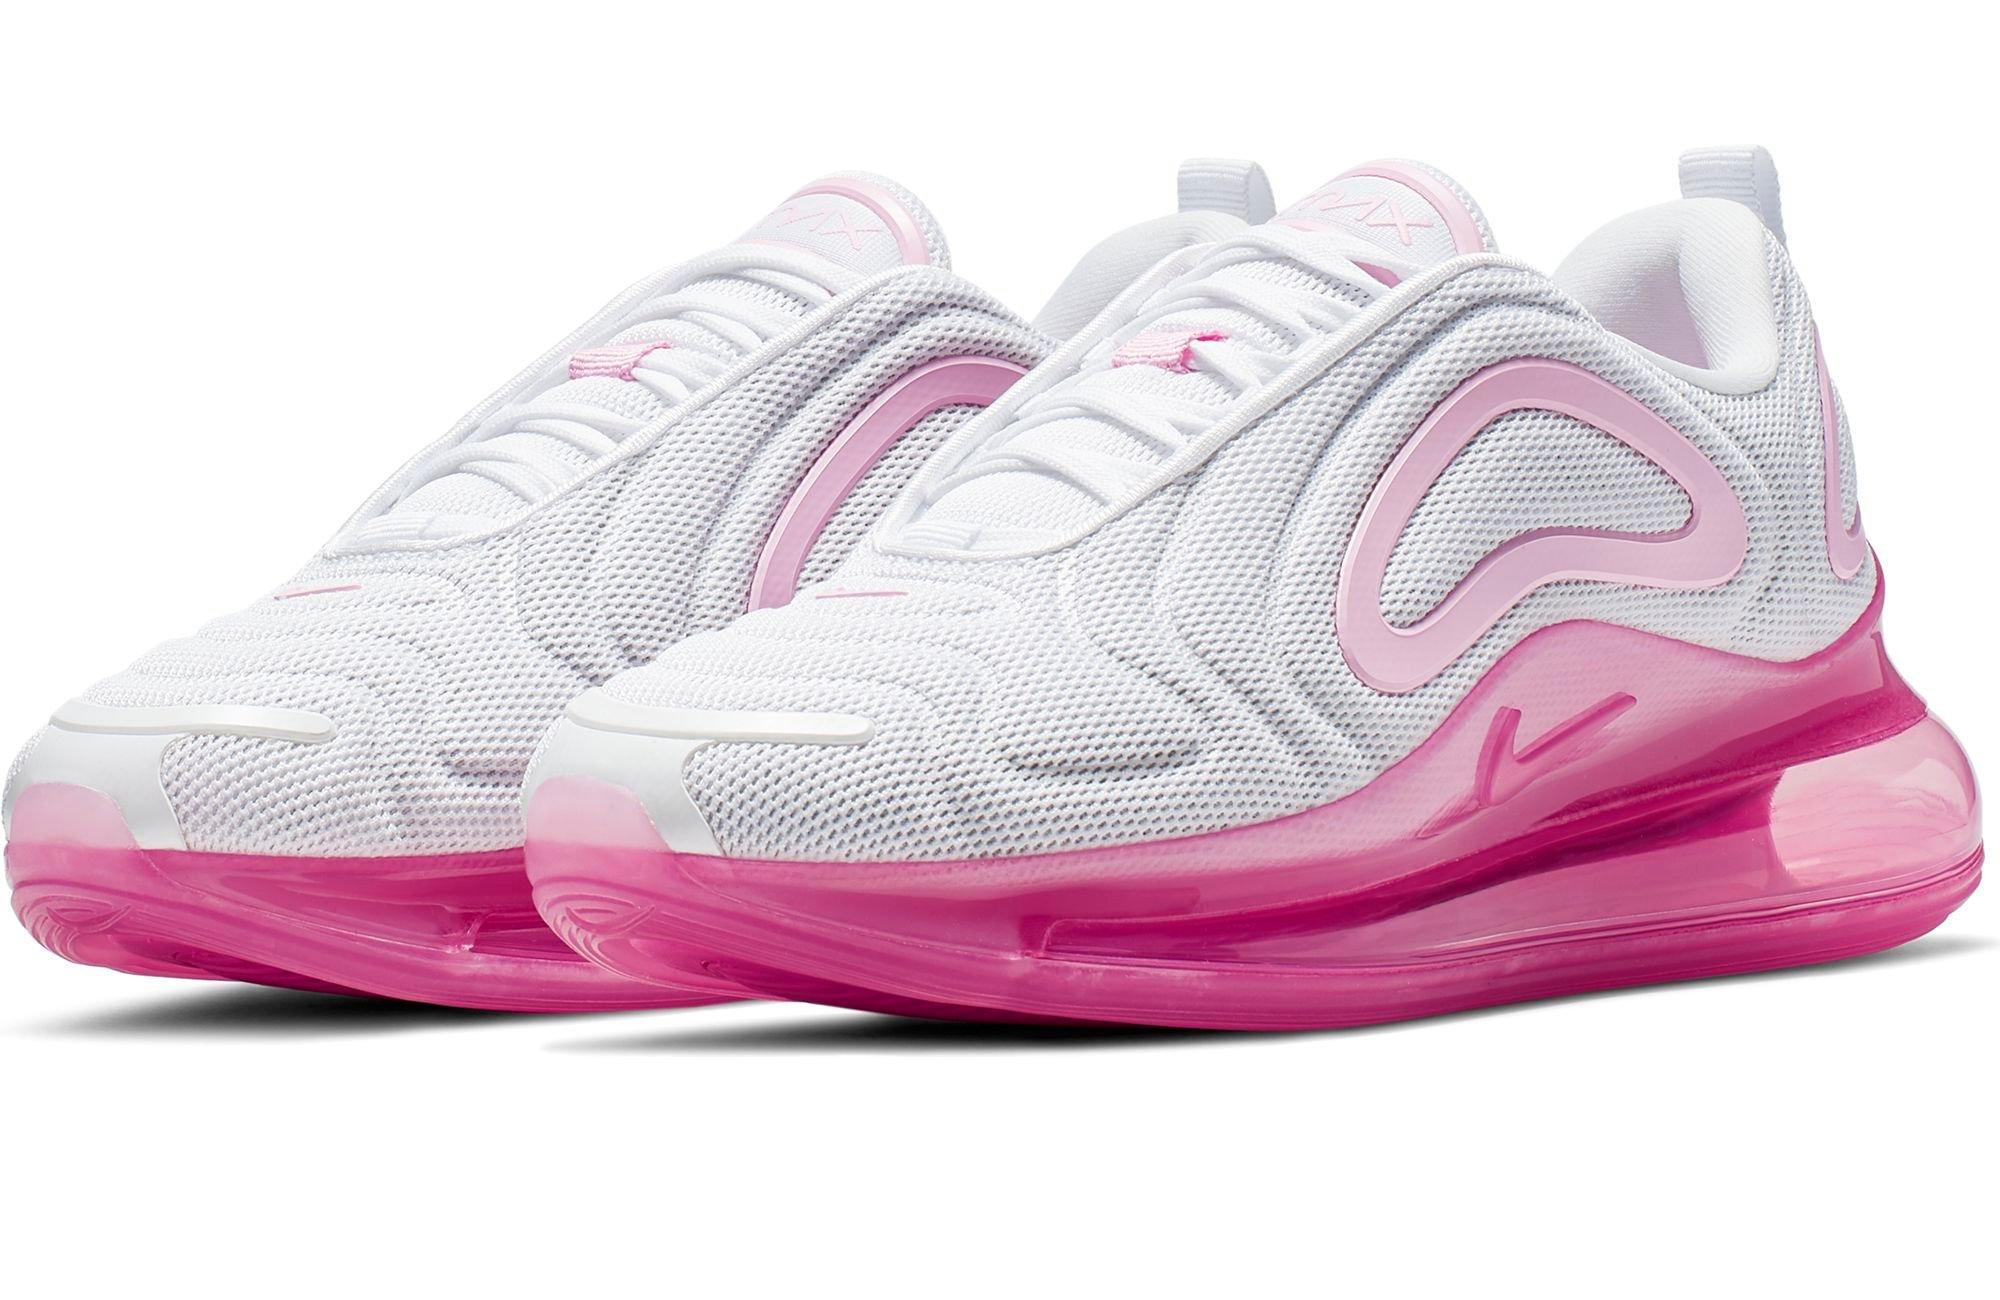 Nike Air Max 720 trainers in pink and blue